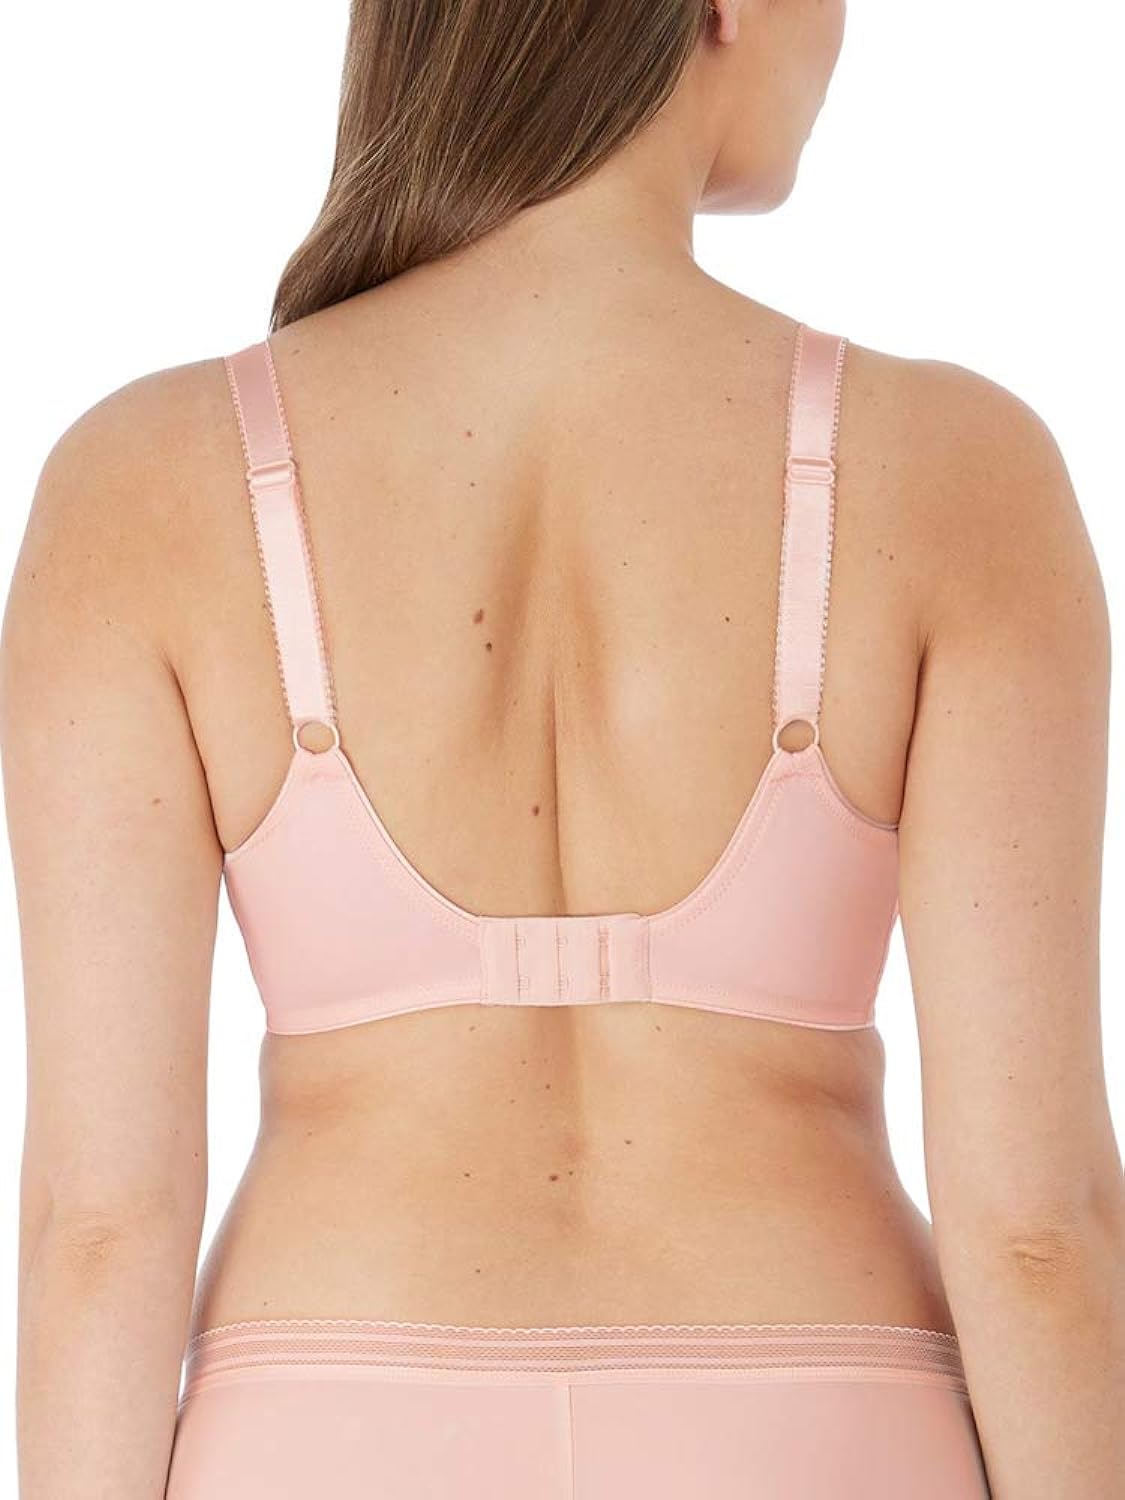 fusion full cup side support bra review